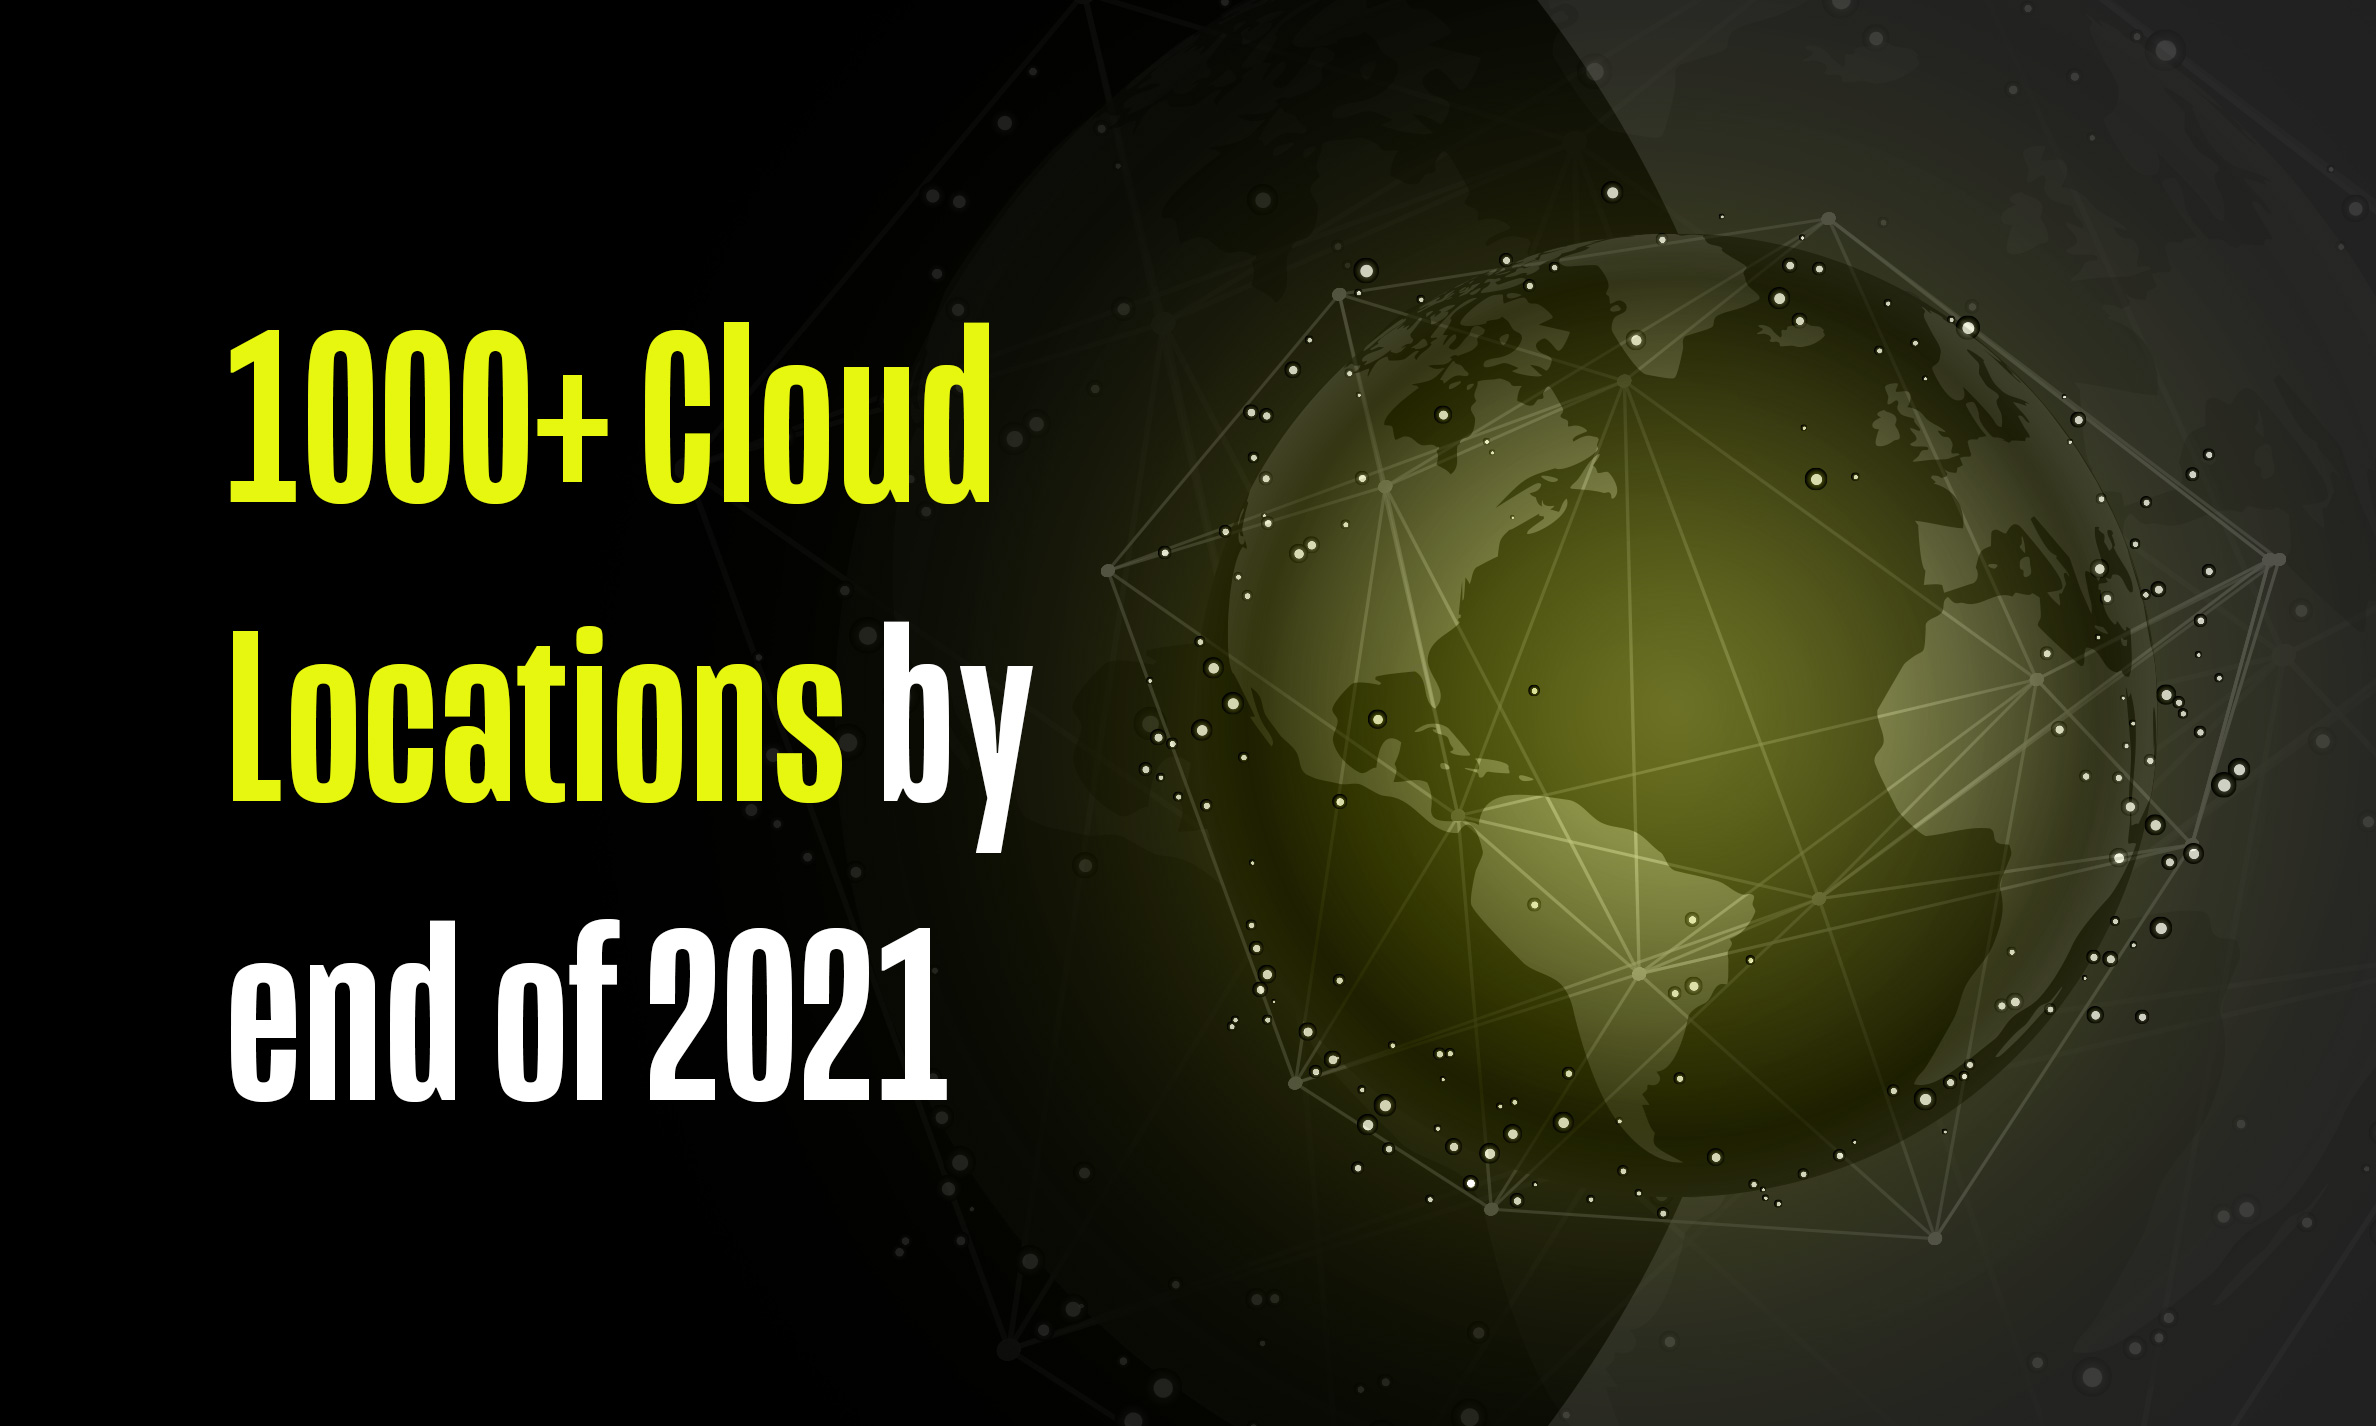 1000+ Cloud Locations by end of 2021